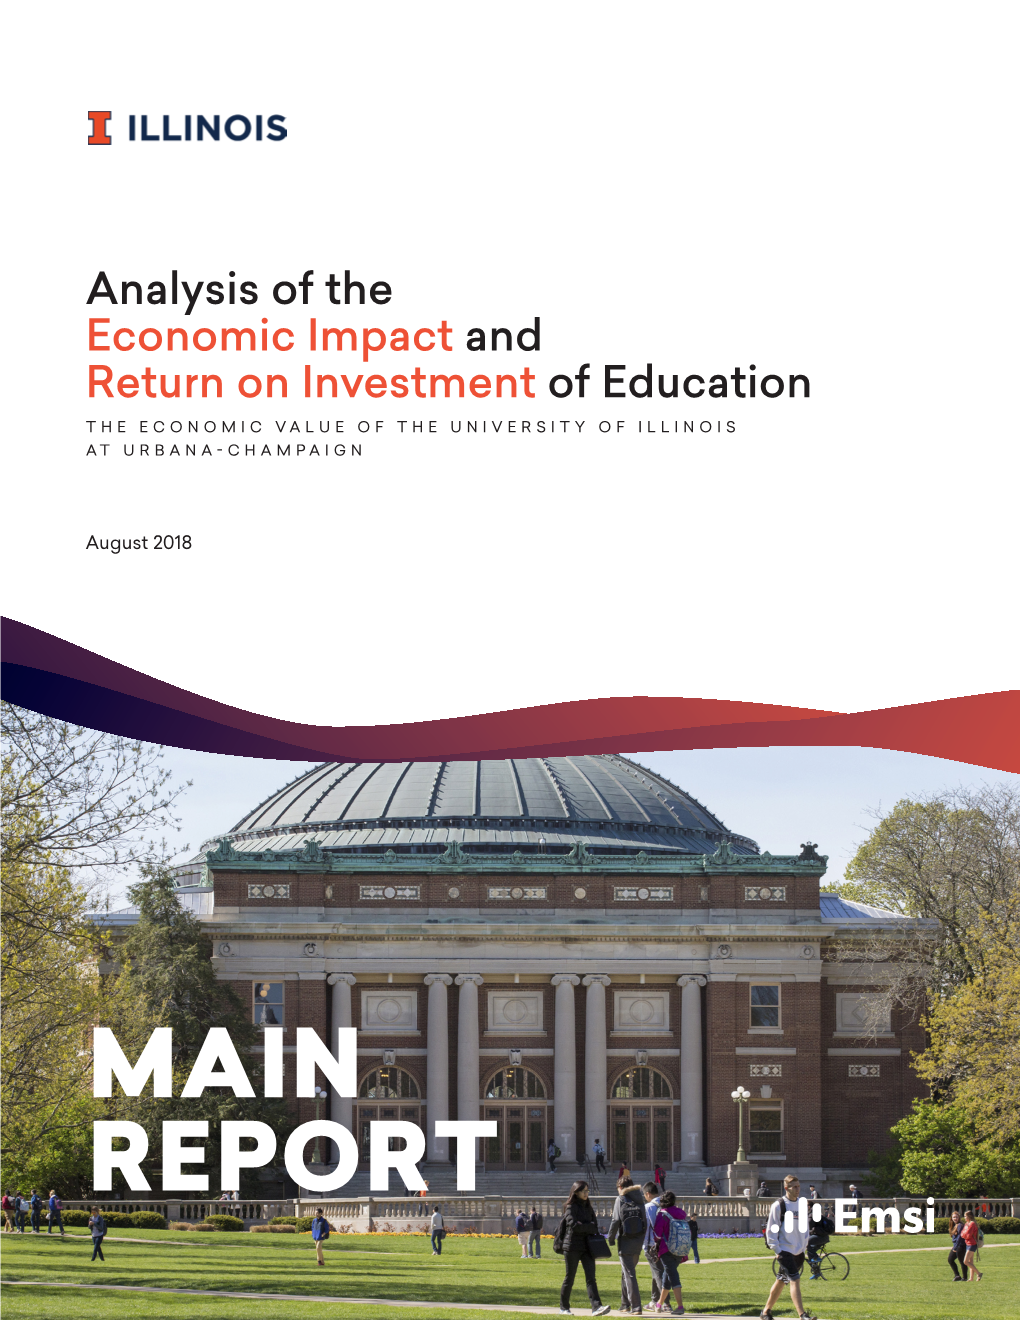 Analysis of the Economic Impact and Return on Investment of Education the ECONOMIC VALUE of the UNIVERSITY of ILLINOIS at URBANA-CHAMPAIGN